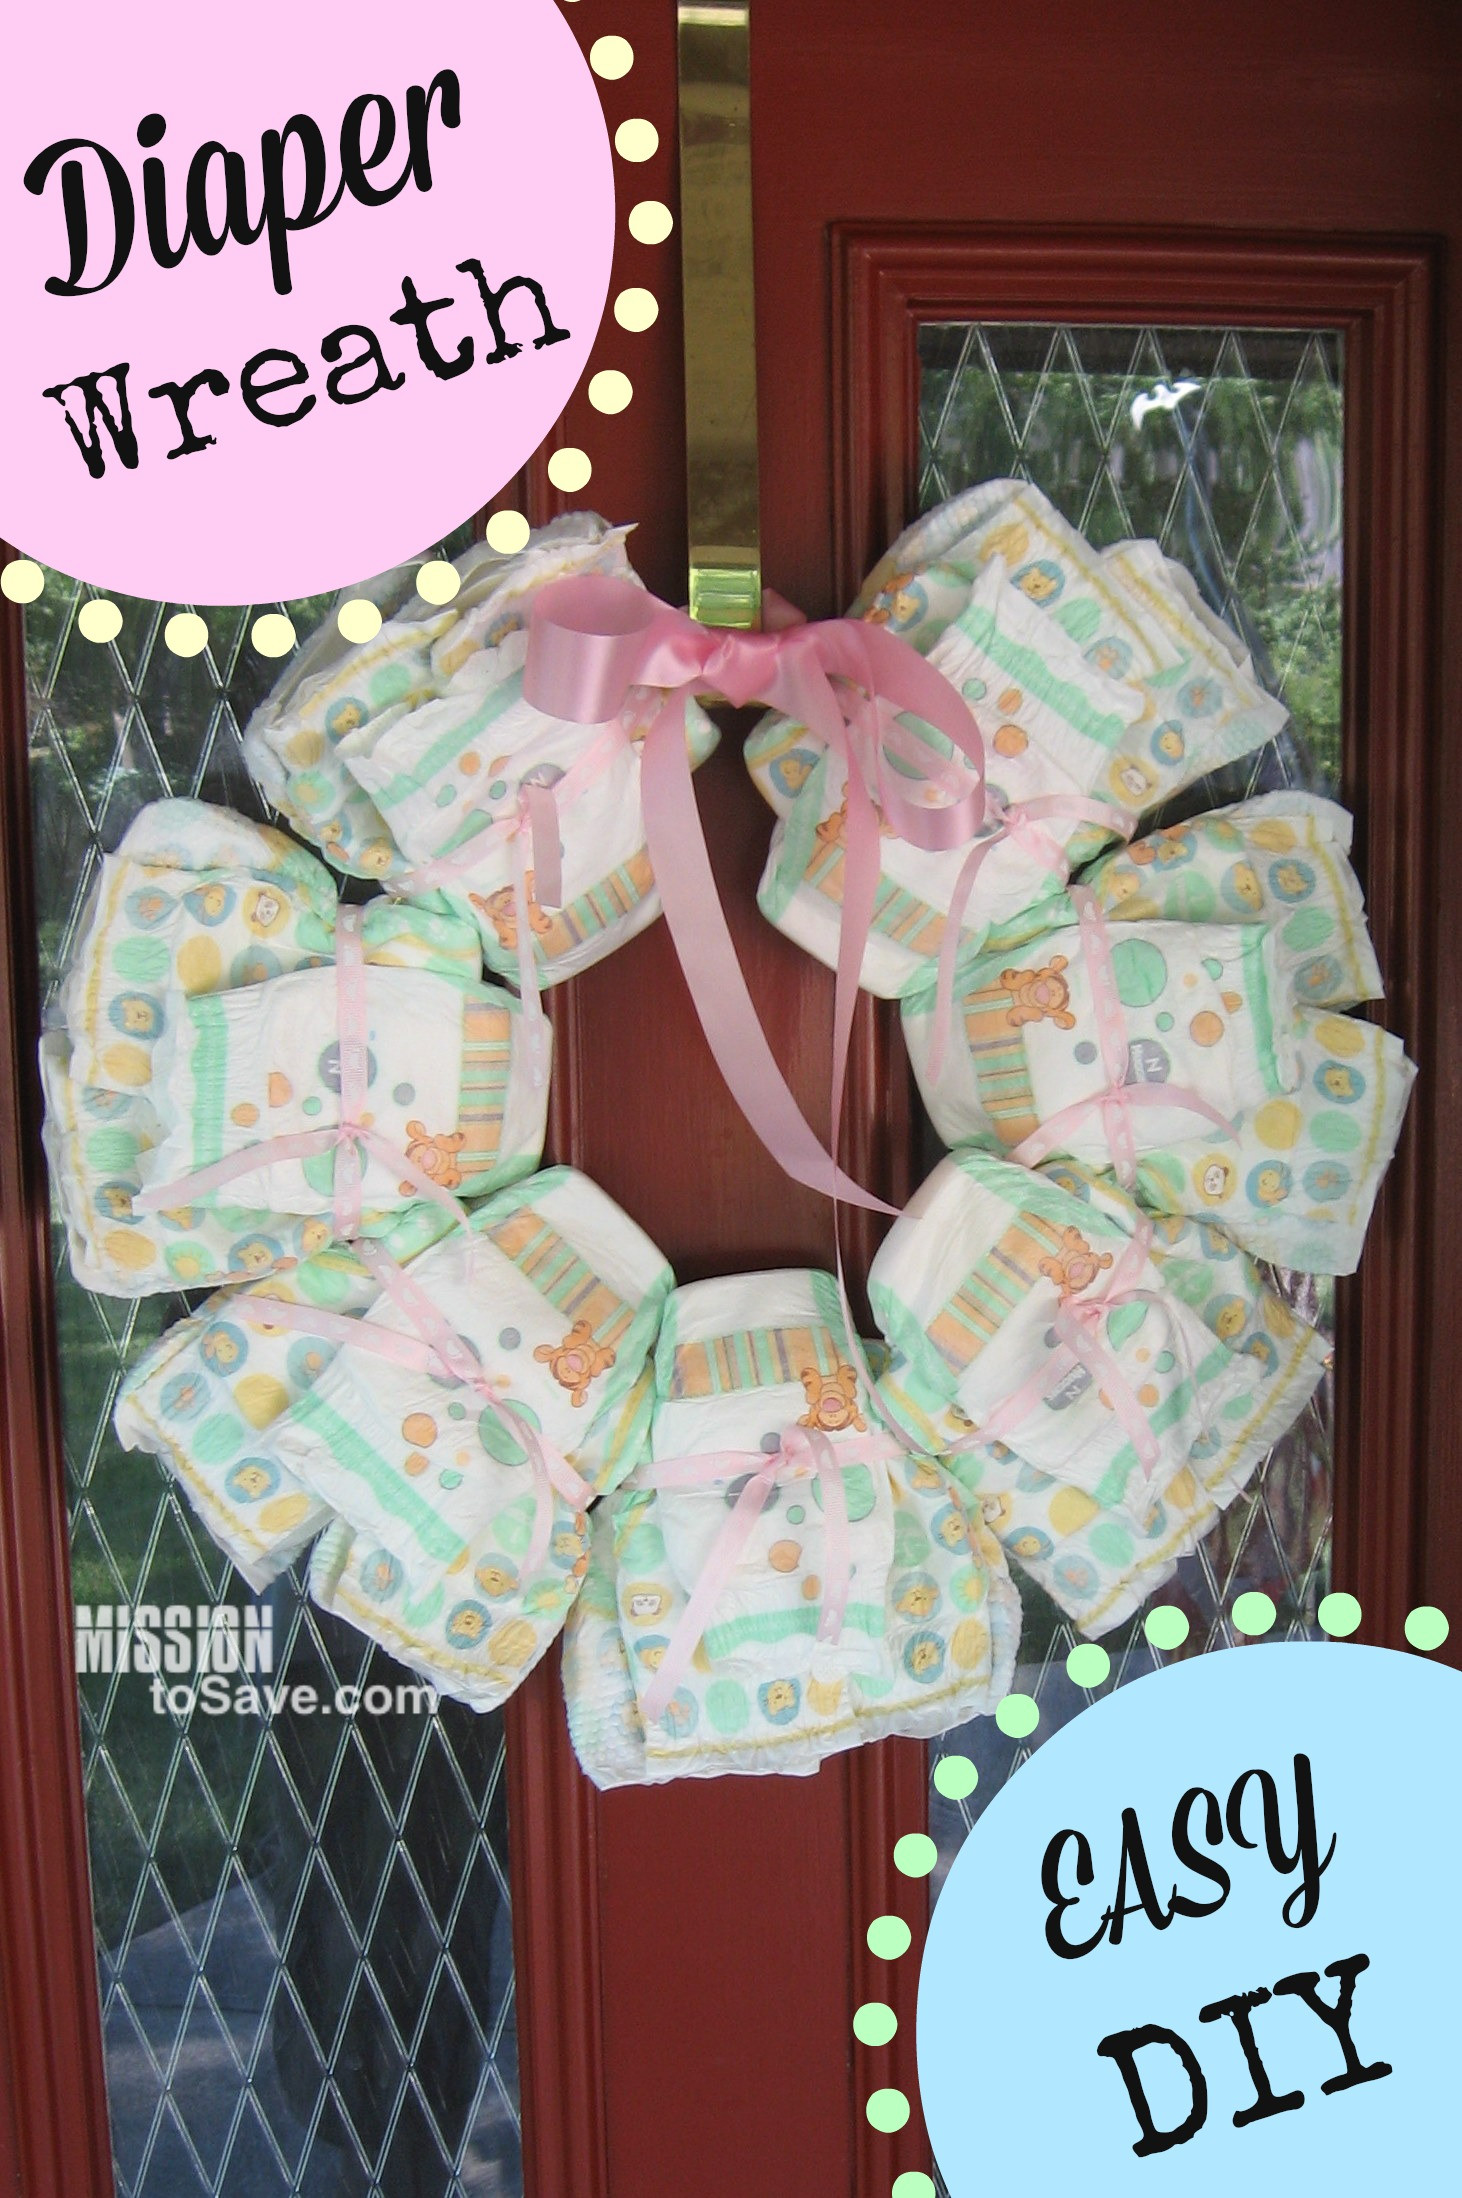 Welcome Baby Gift Ideas
 Adorable Diaper Cake for DIY Baby Shower Gift Mission